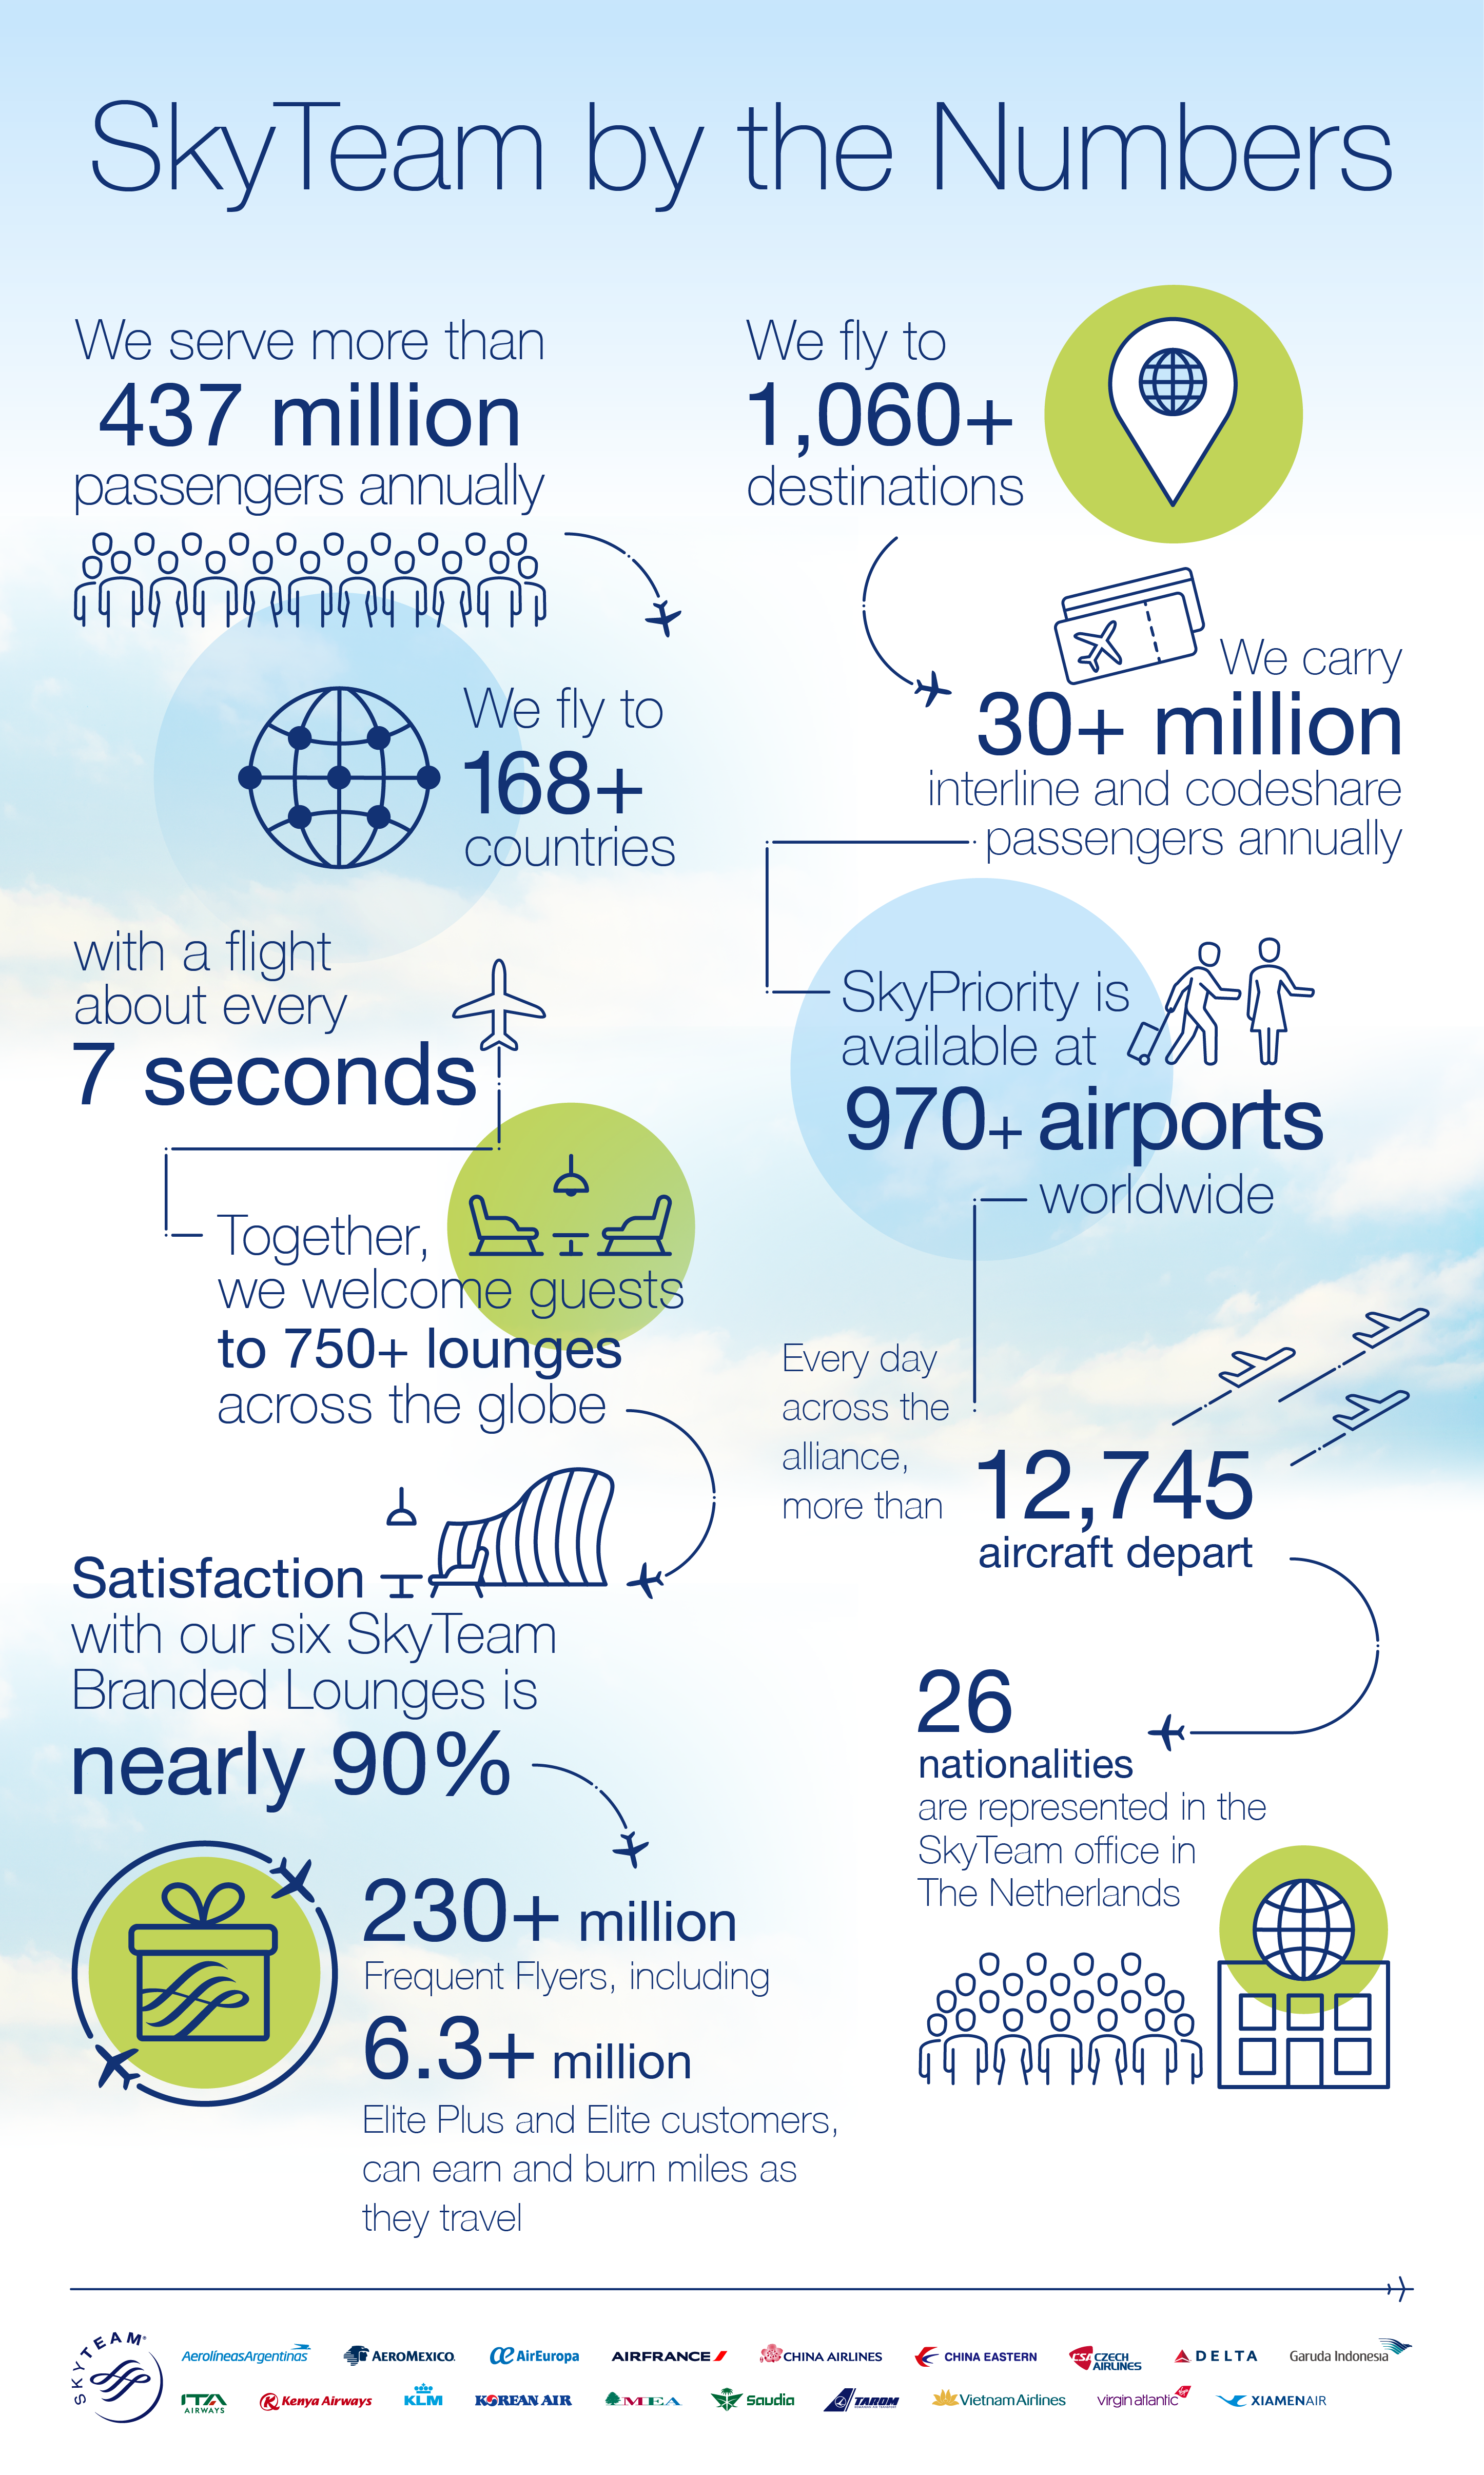 SkyTeam by the Numbers